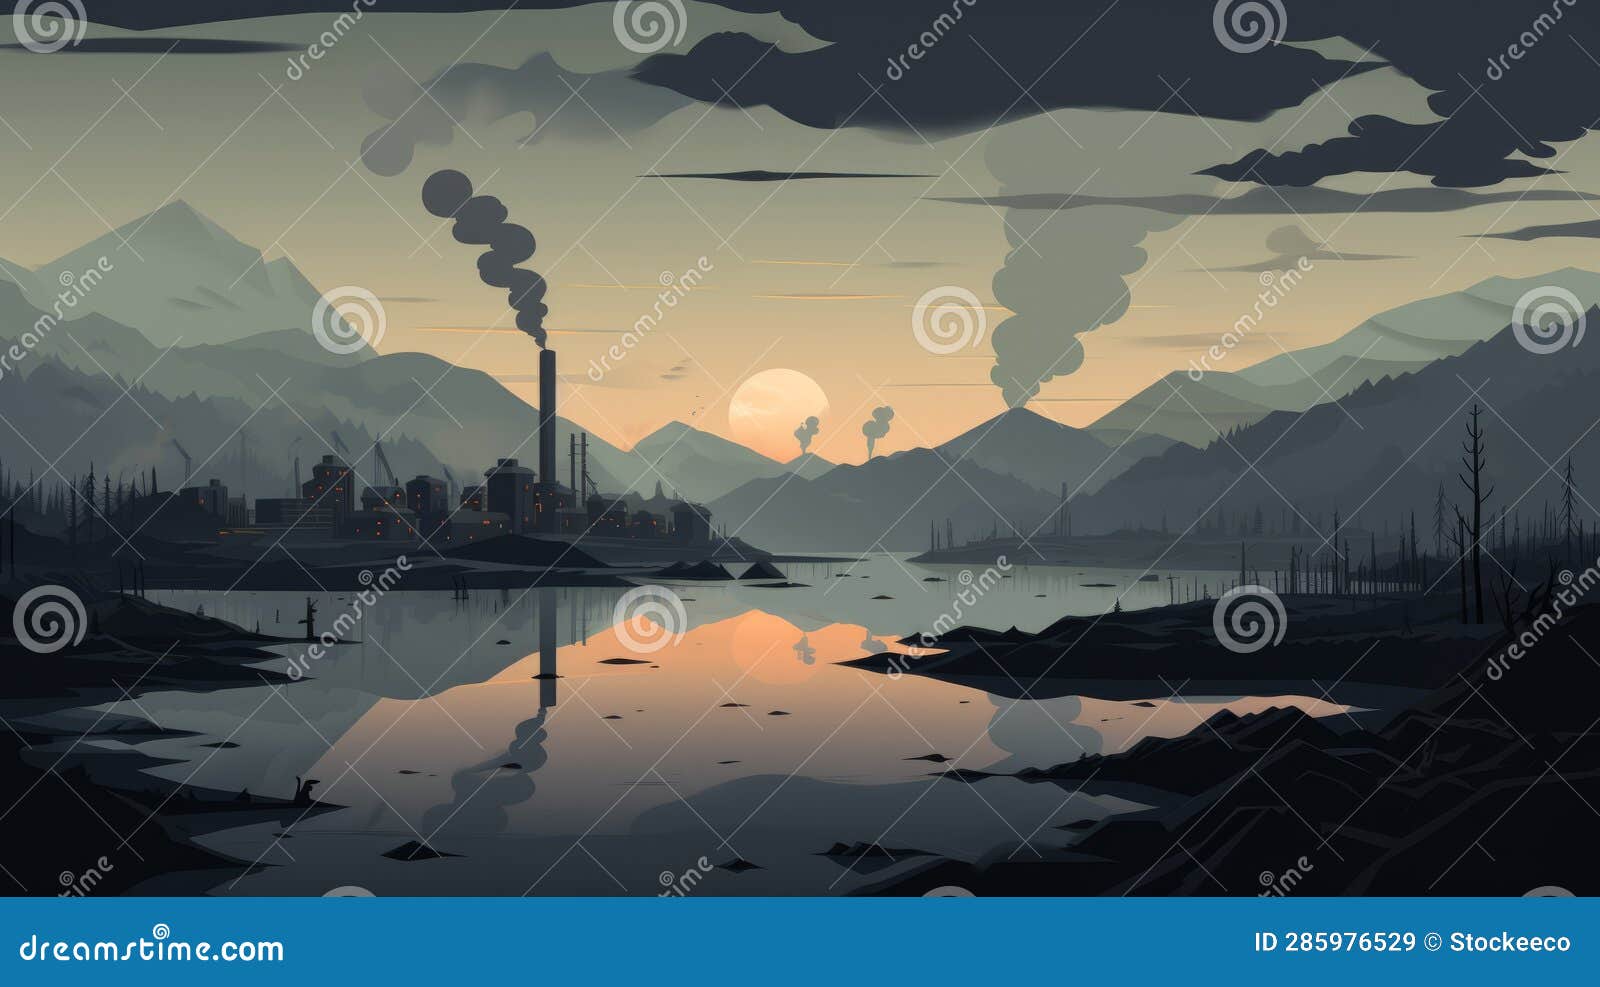 industrial landscape with smoke: a romantic whistlerian riverscape in flat shading